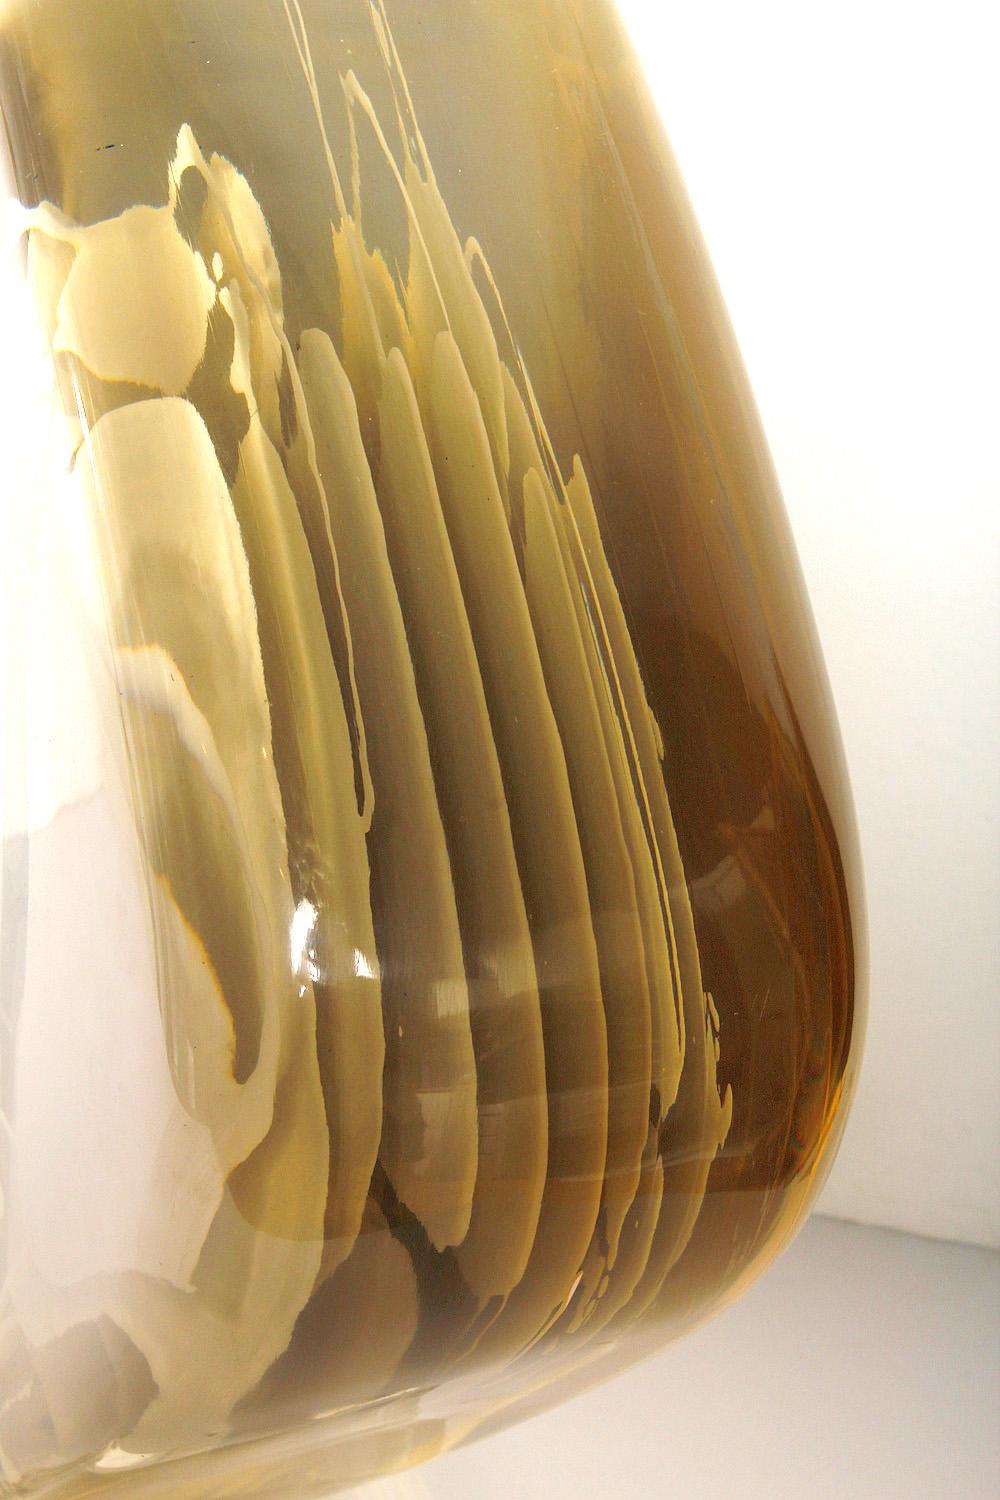 Epoxy Resin Salvatore Zagami Untitled Poly/Resin Sculpture, 1978